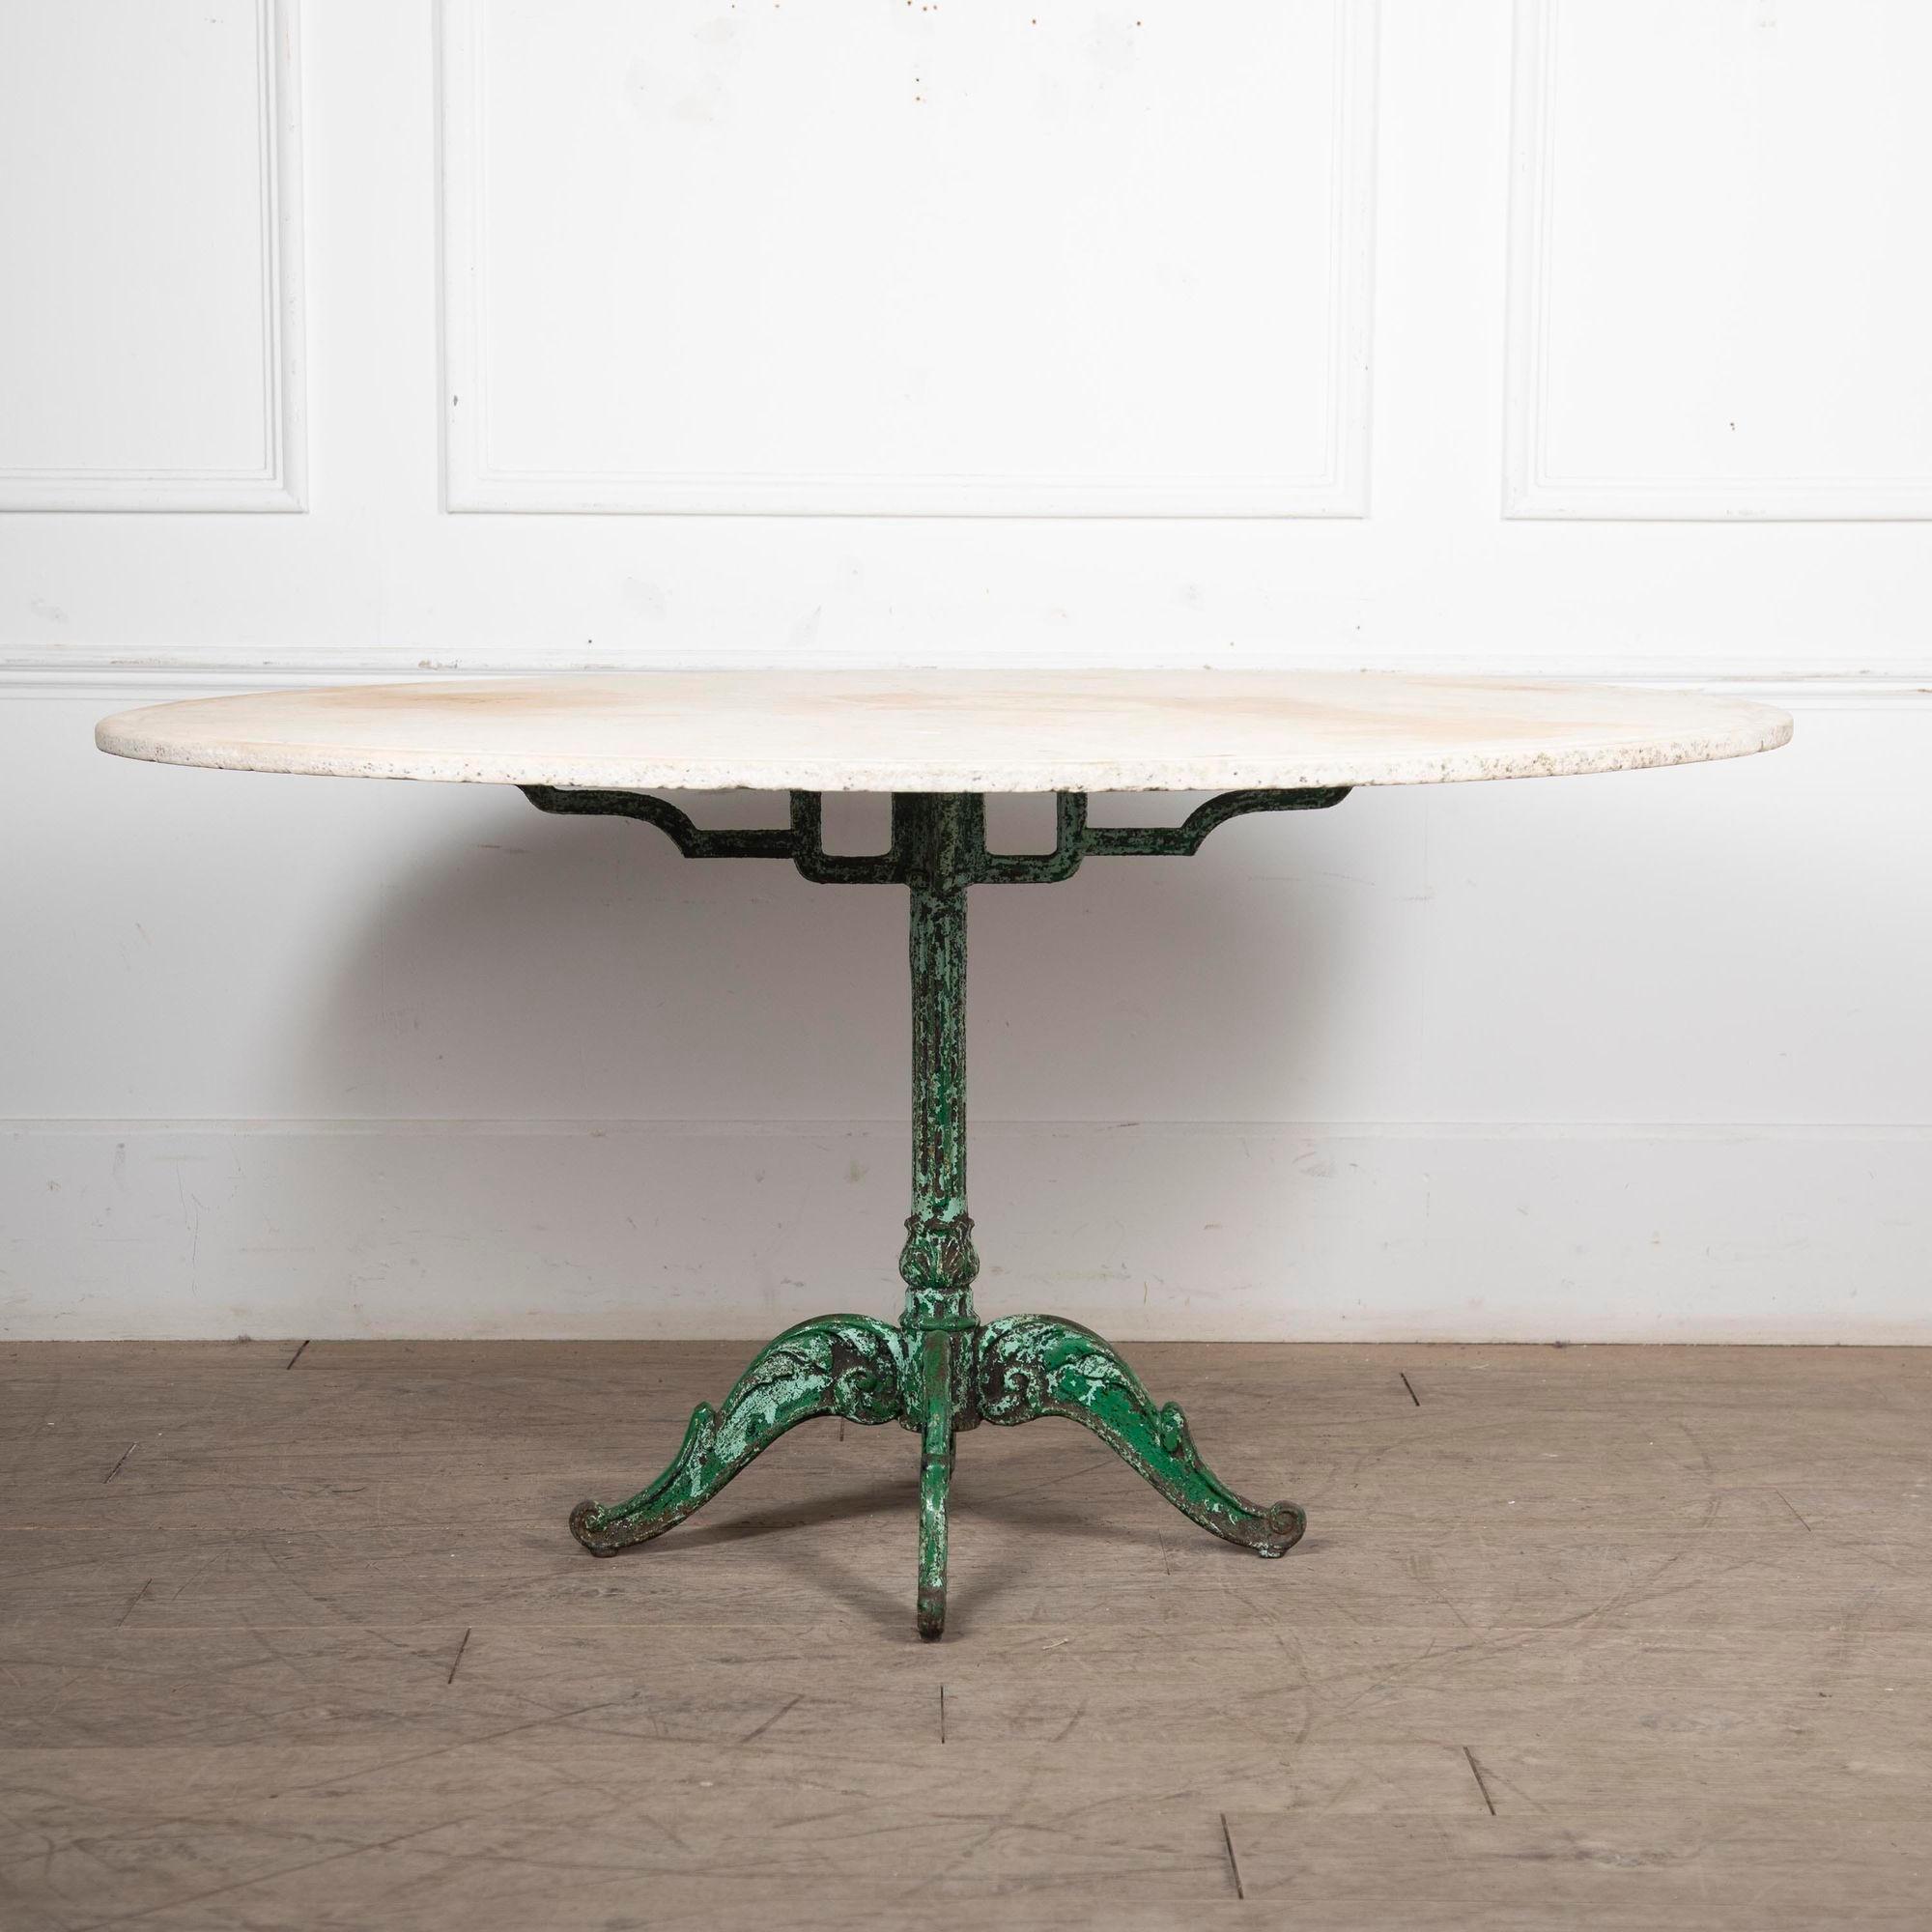 Wonderful scale late 19th century iron-based garden or conservatory table with a beautifully weathered old marble top.
The base of the table is in scraped old layers of pale and dark green paint.